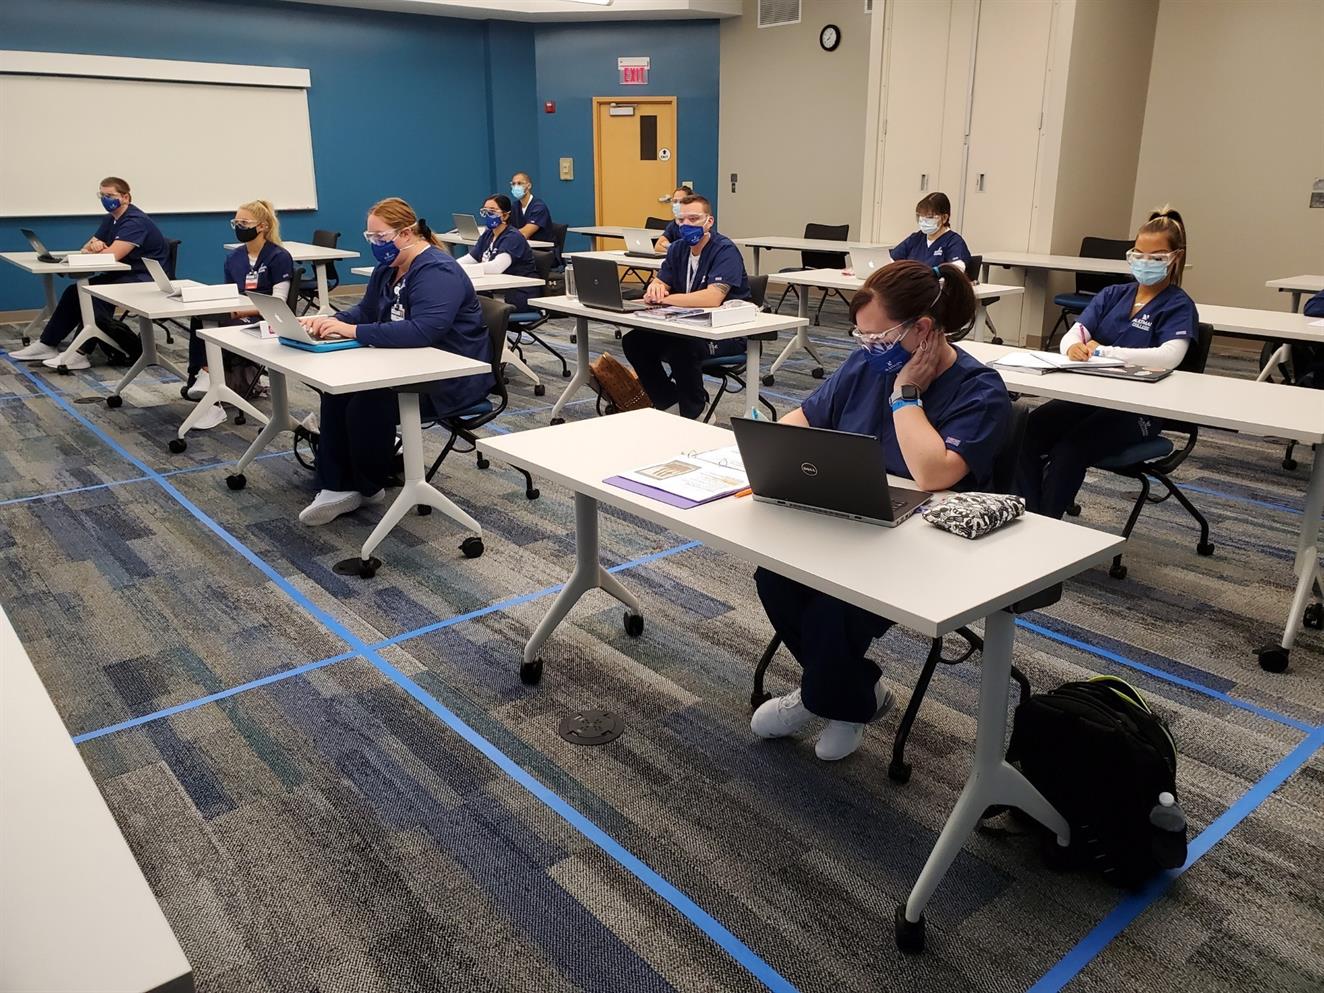 Radiography students spaced 6 feet apart in the classroom